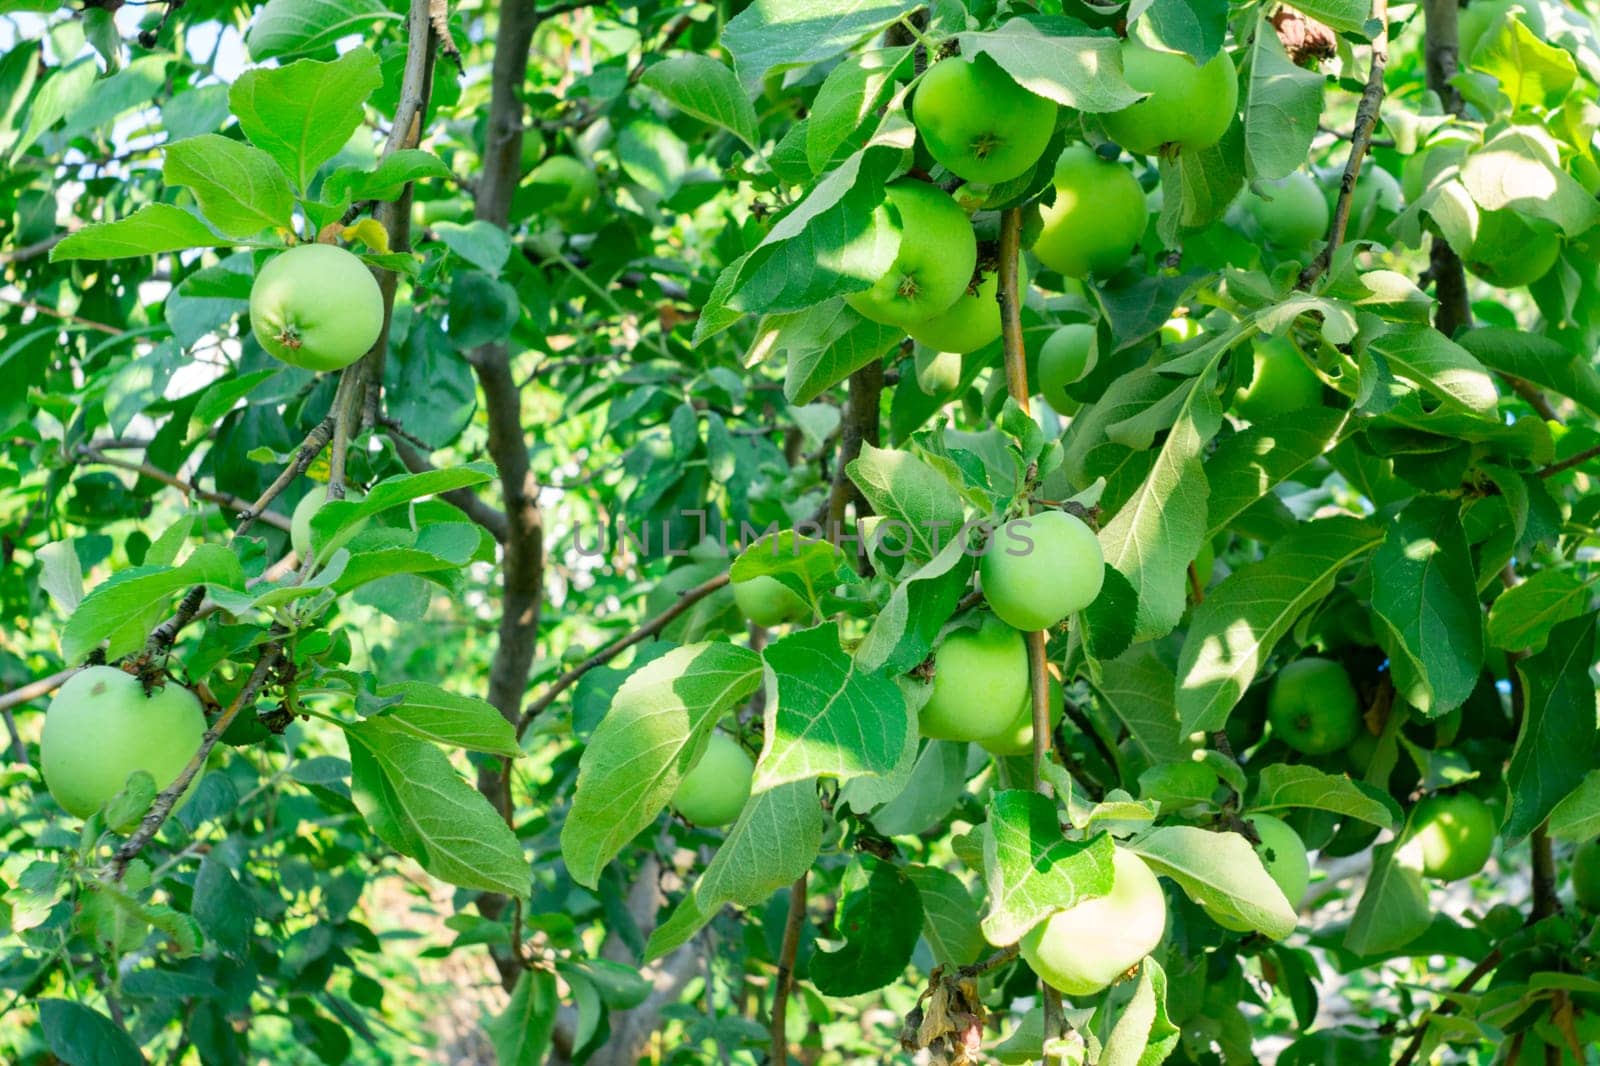 Tree, adorned with an immense array of vibrant green fruits, illuminates a bountiful garden.